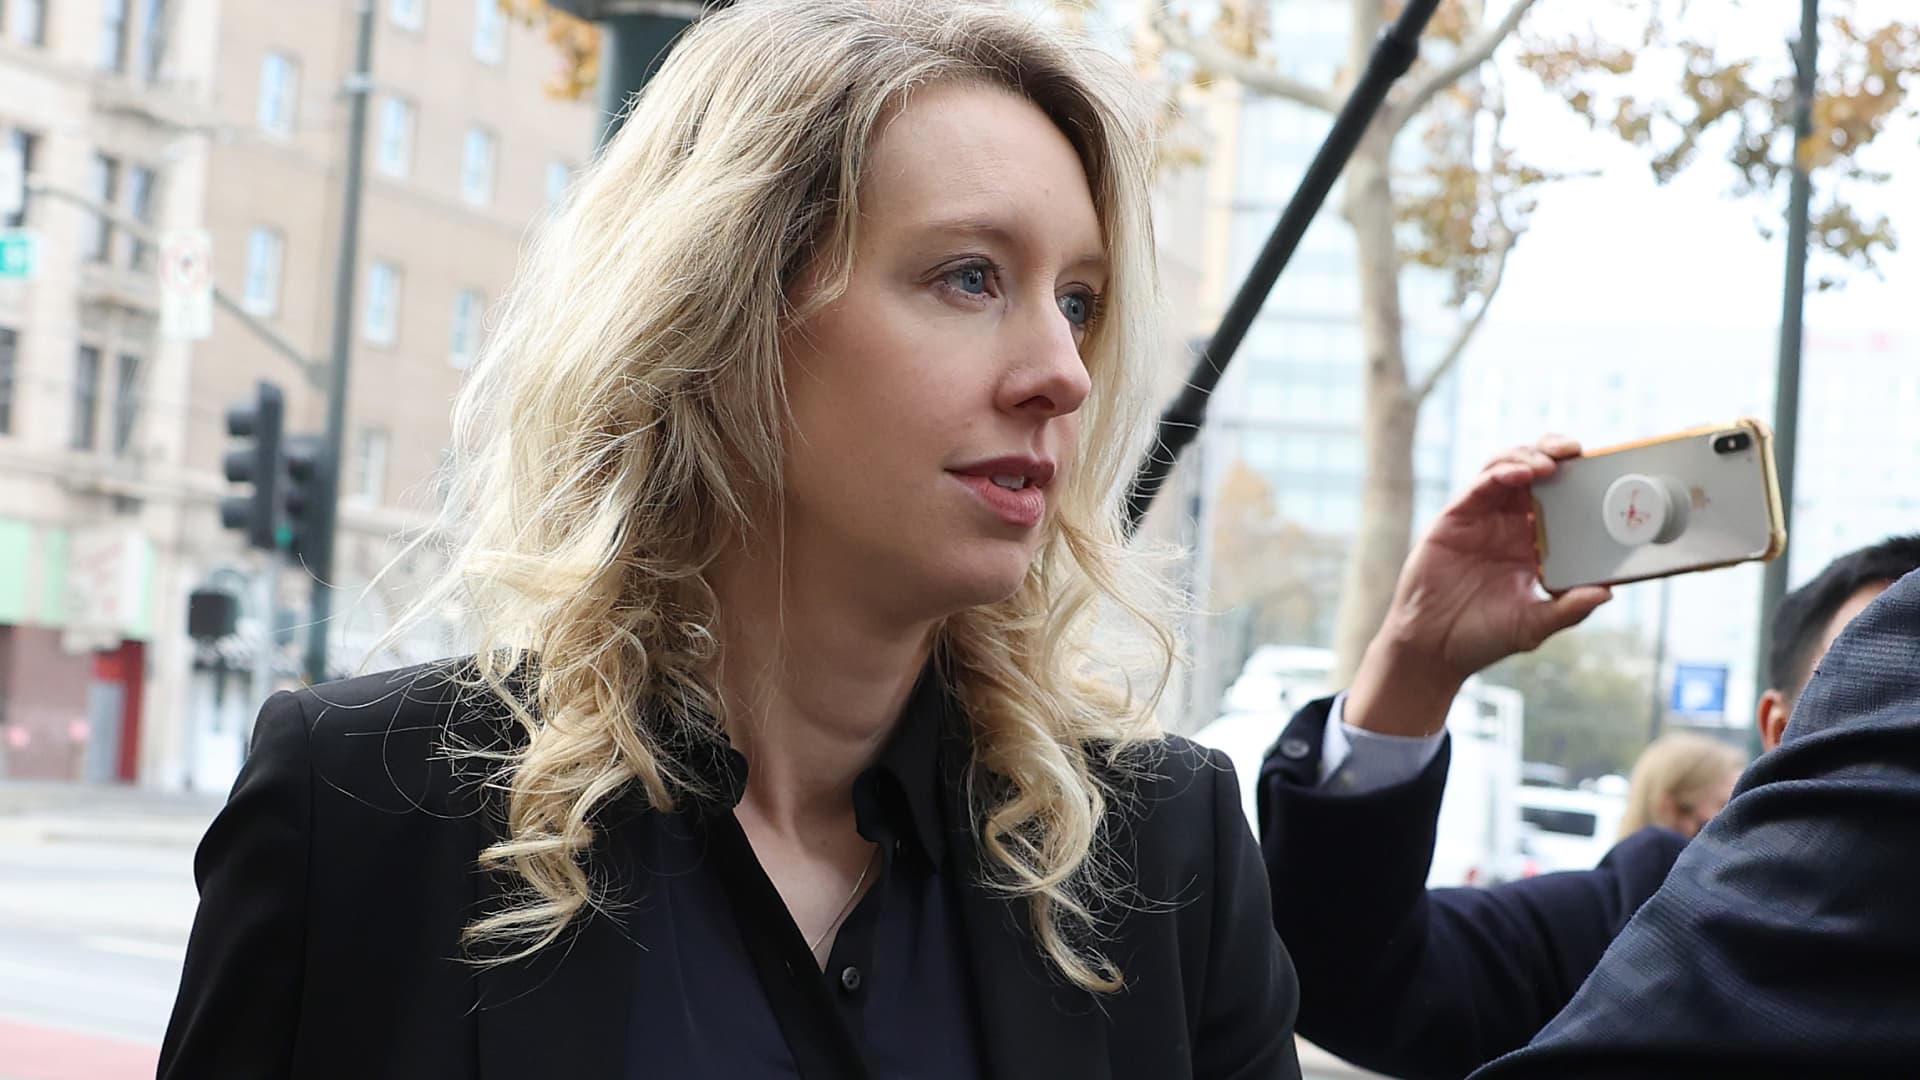 Theranos founder Elizabeth Holmes purchased a one-way ticket to Mexico final yr after she was convicted of fraud